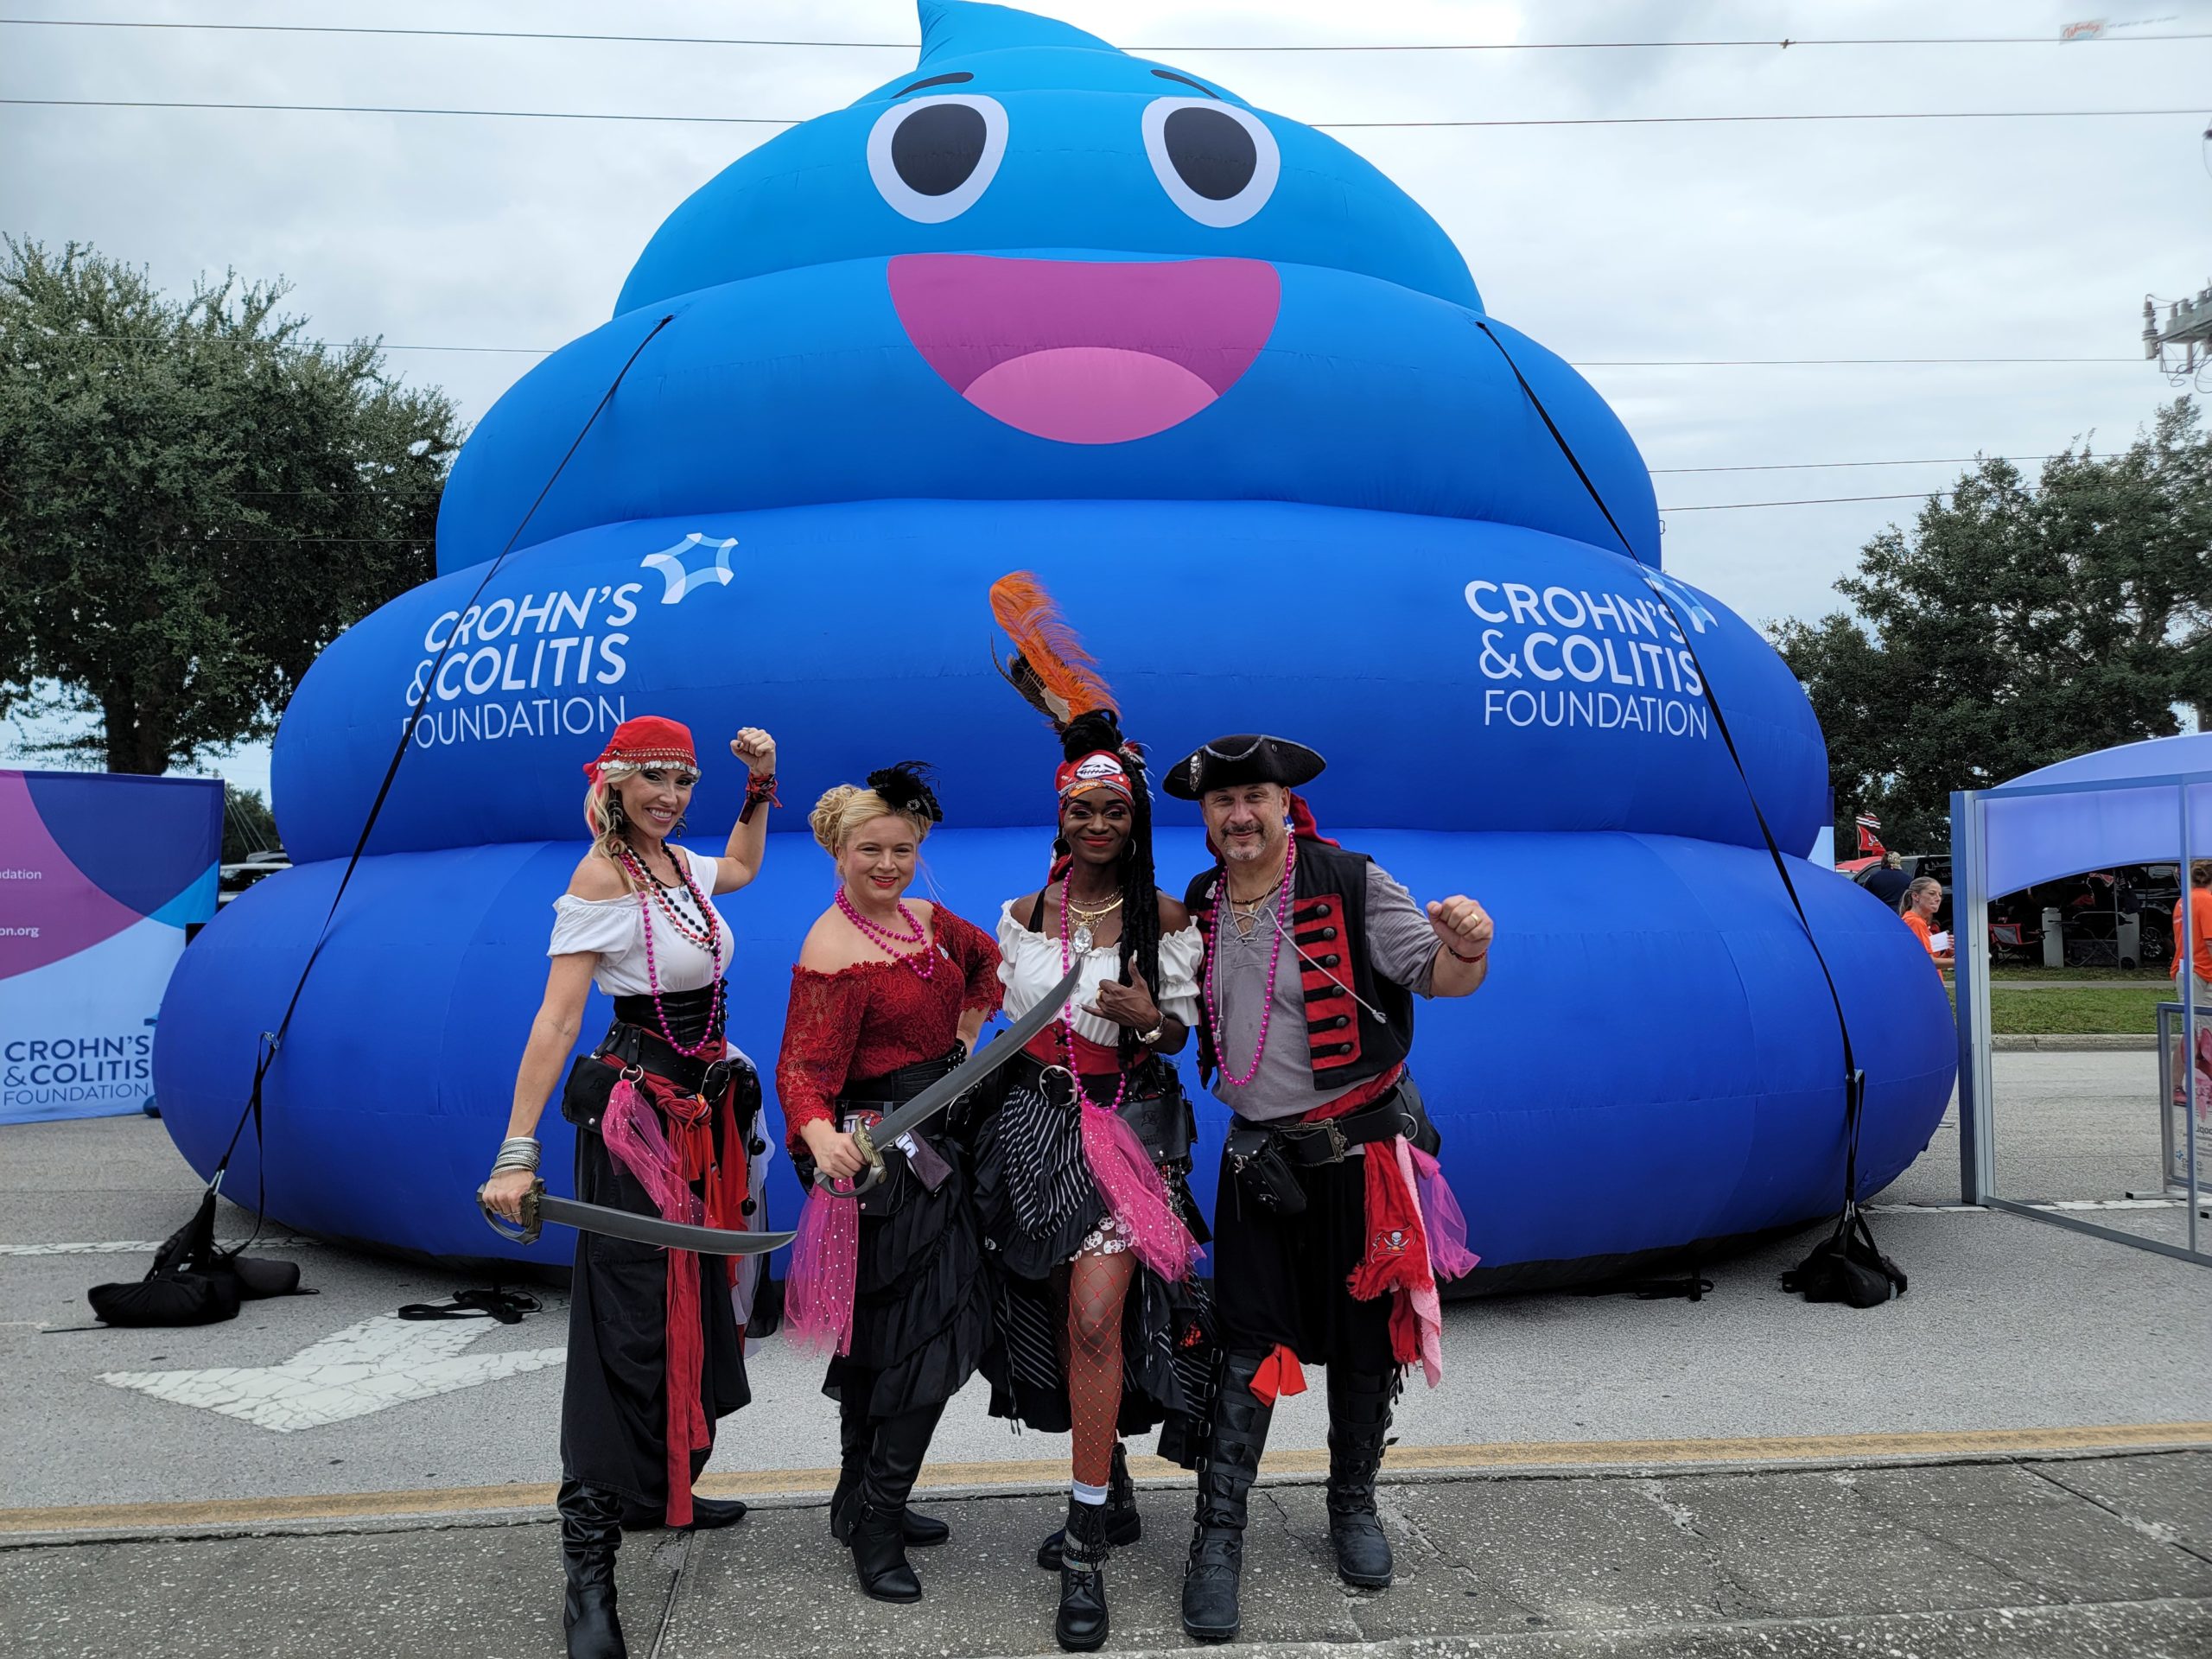 People in pirates costumes posing with a blue inflatable tent